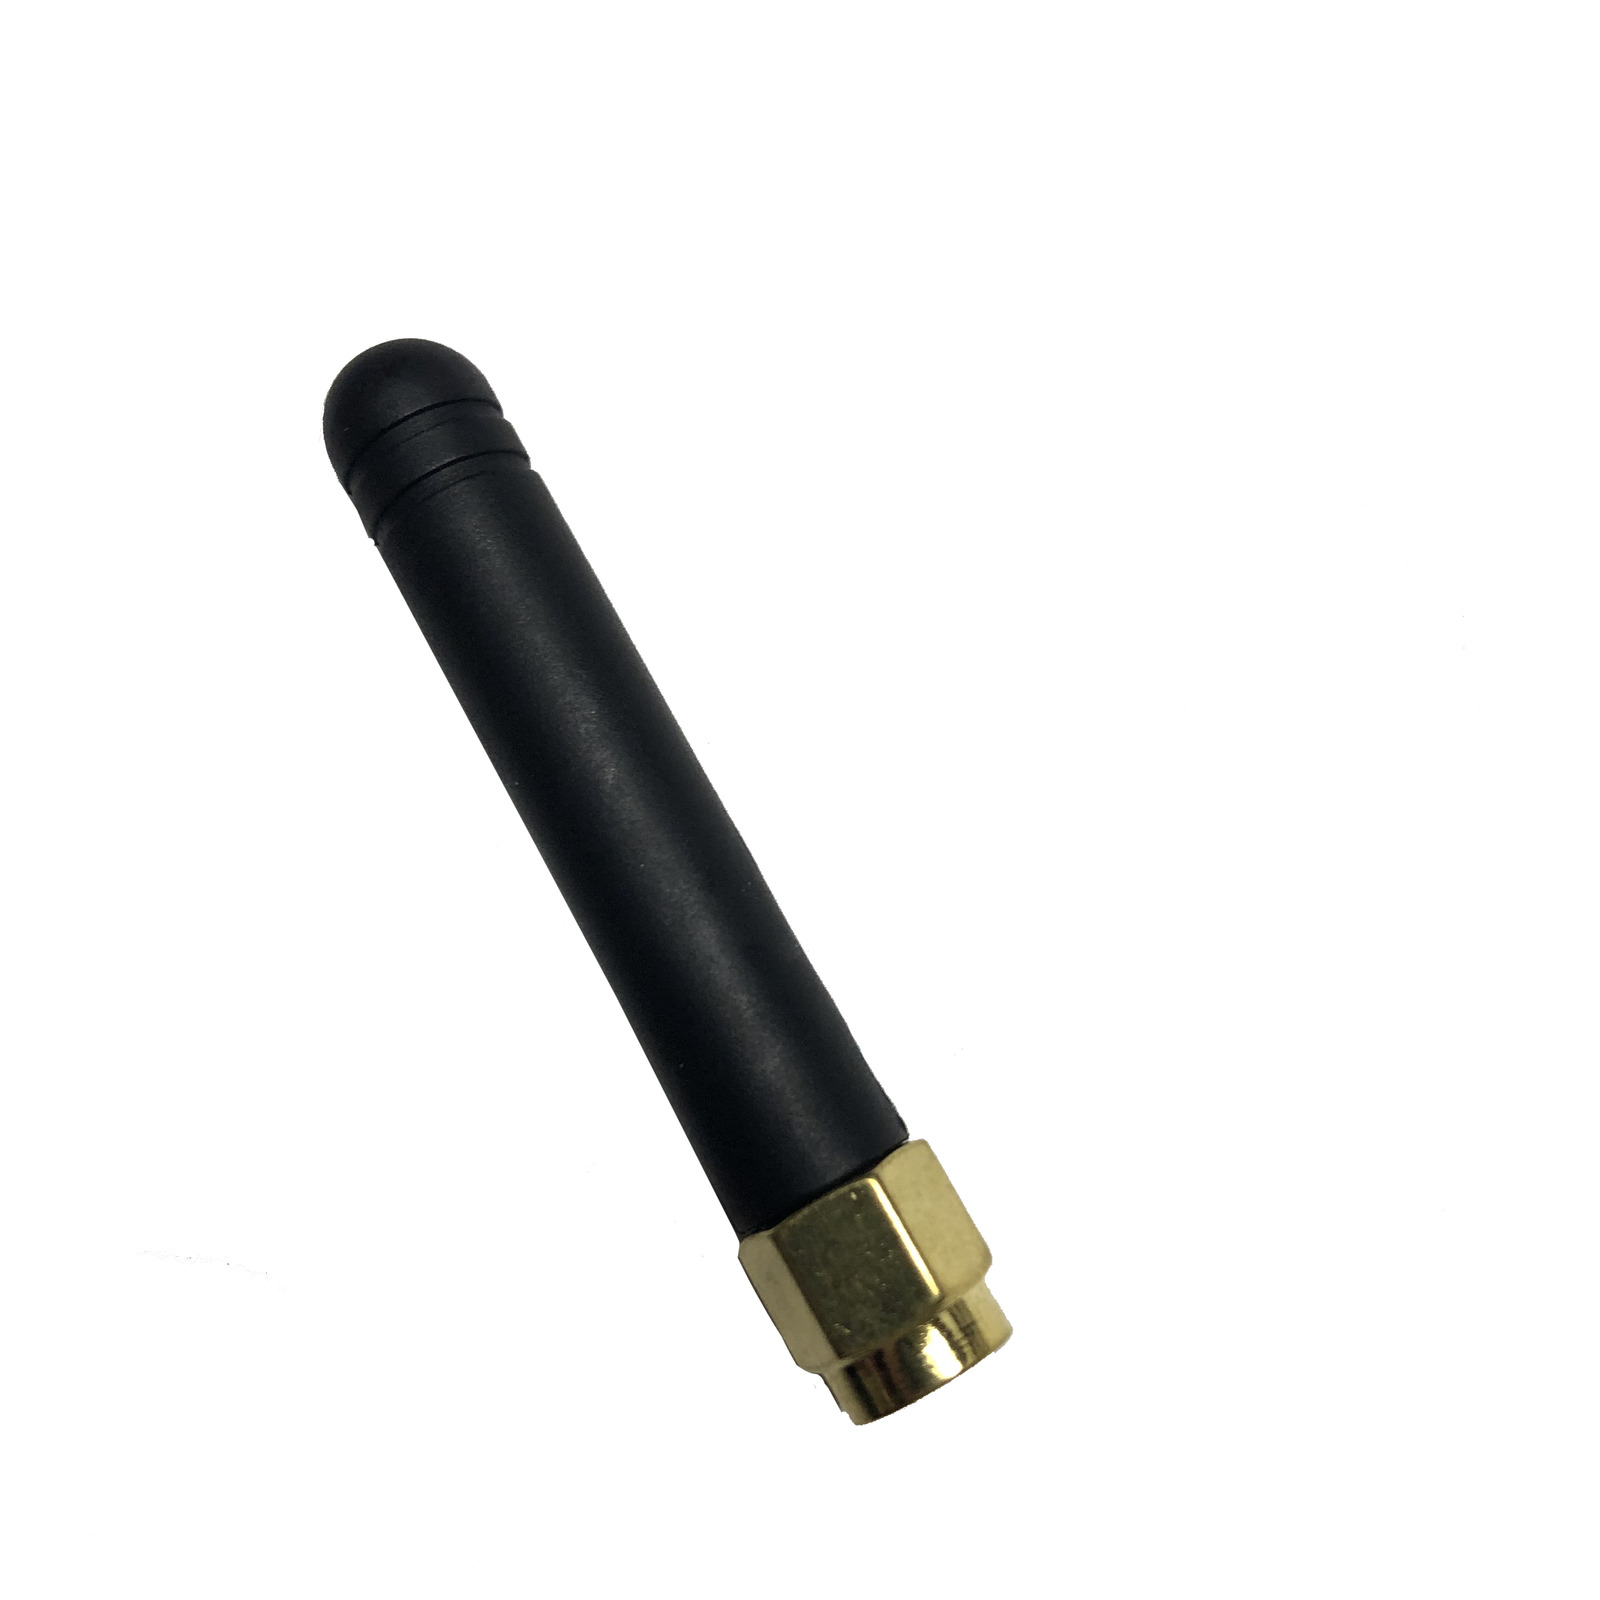 Eagle SMA Male WiFi Antenna 2.4 GHz 3 dBi. Available Now for 1.95